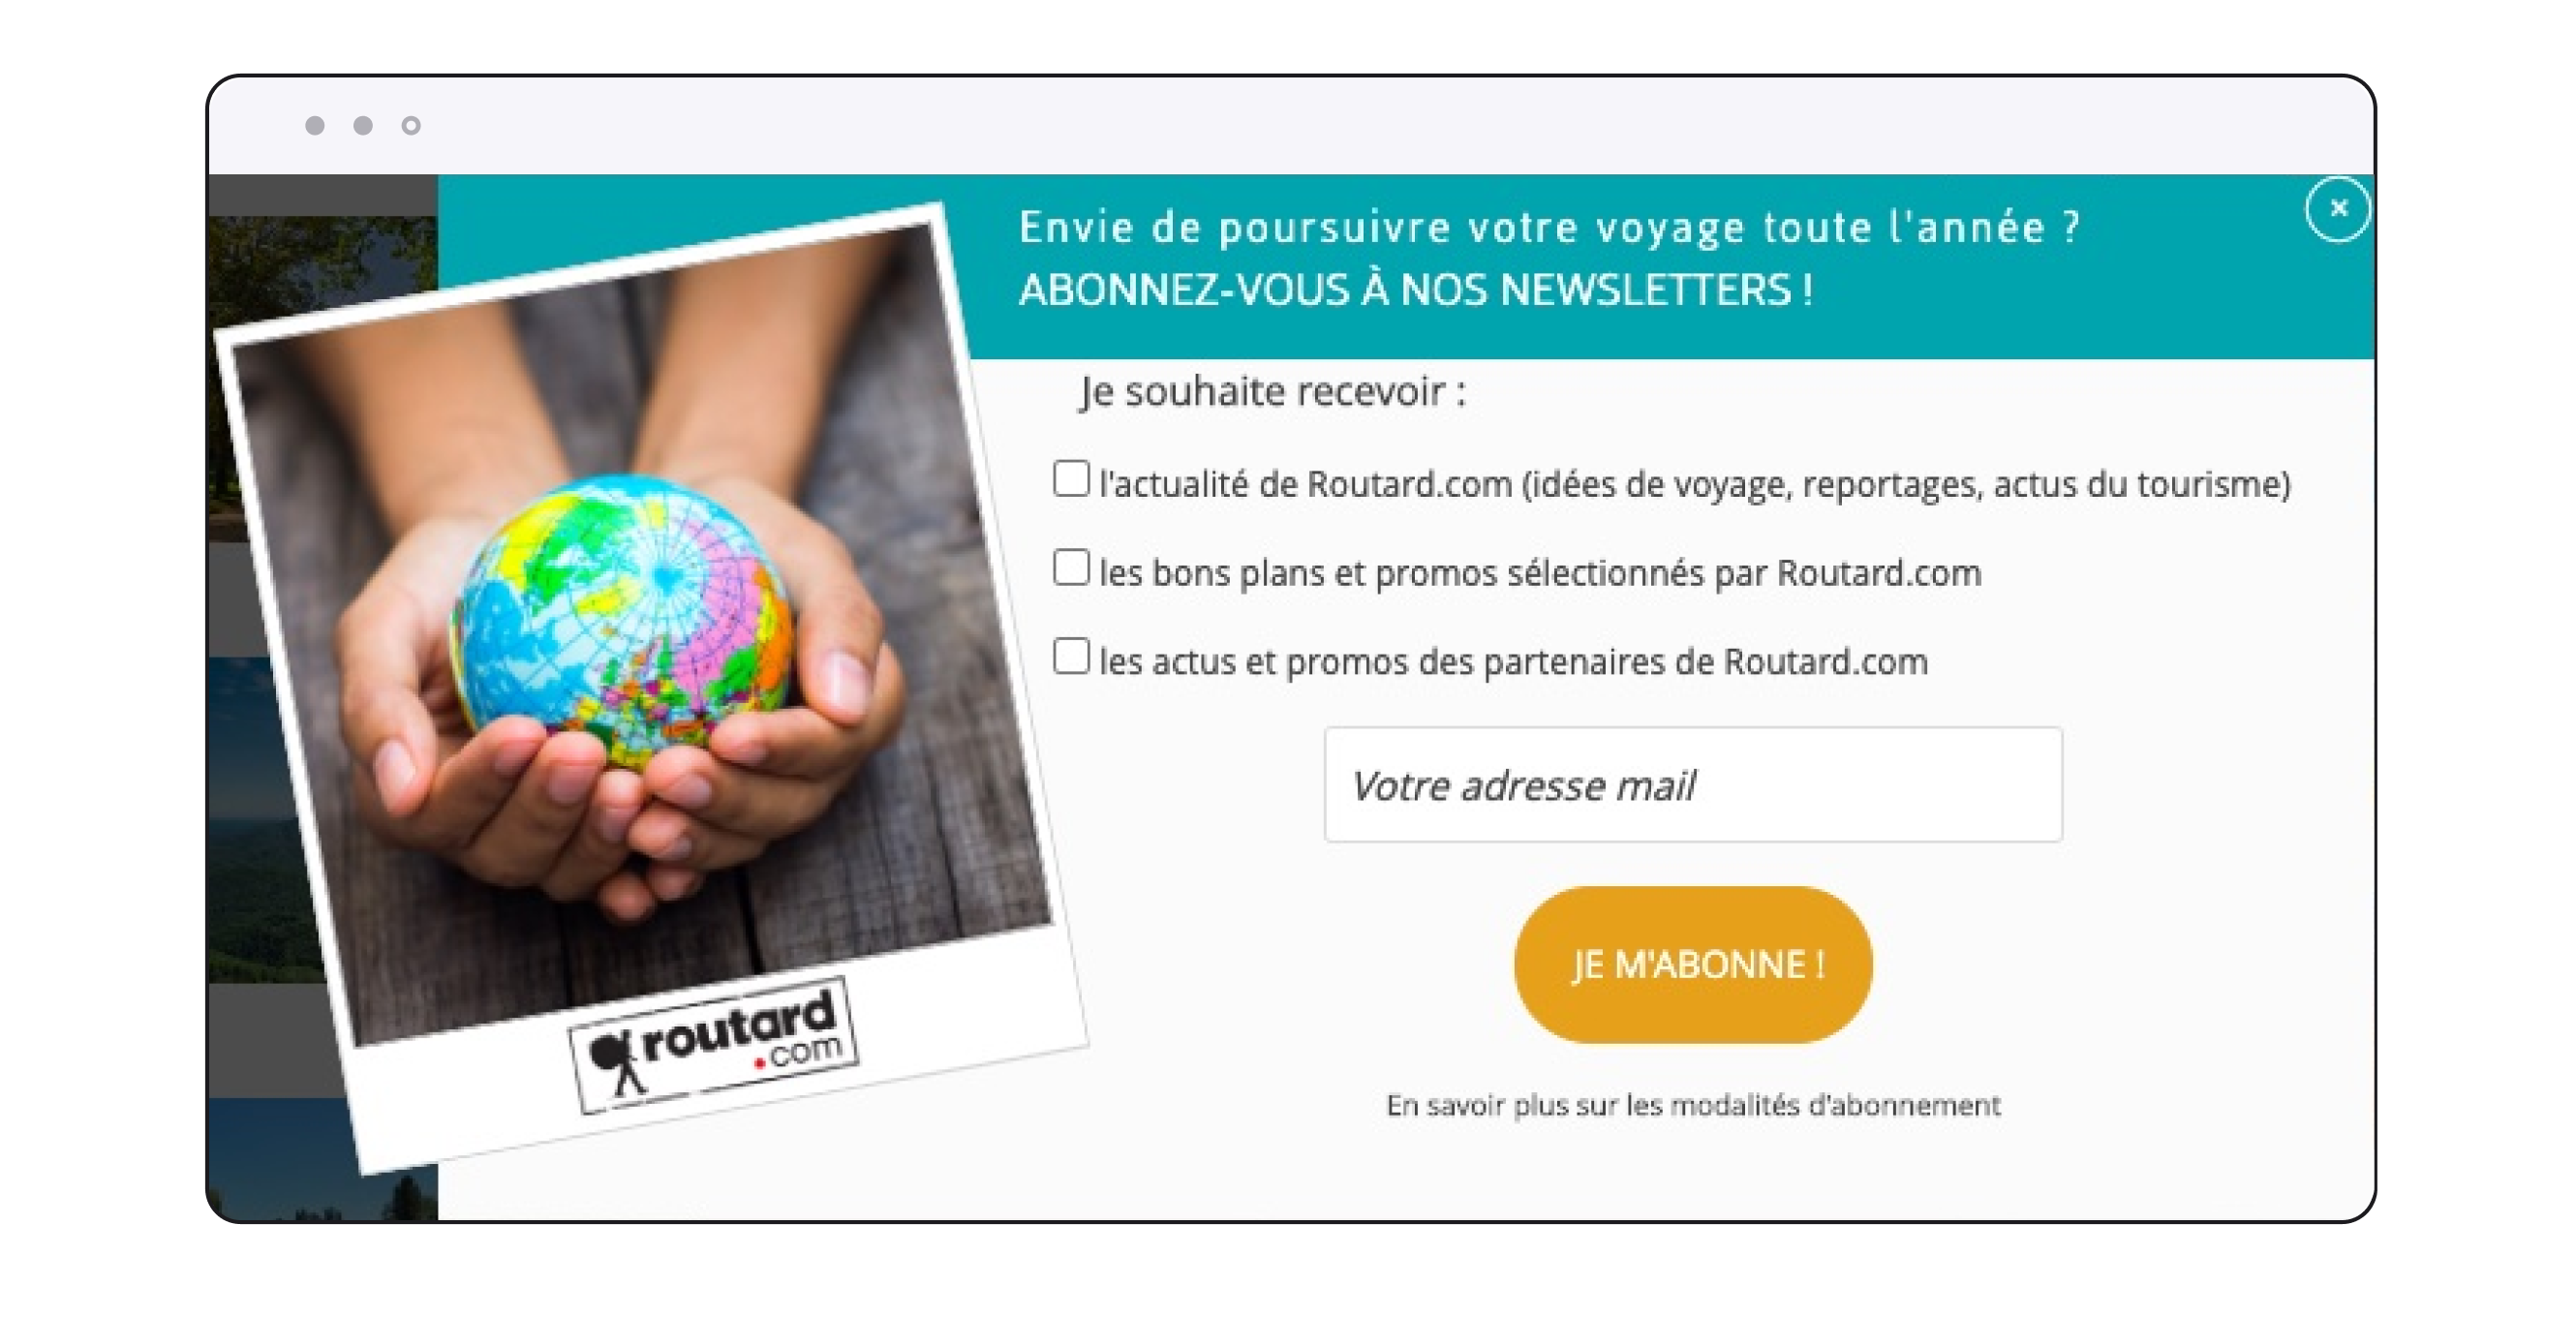 Guide du routard popin